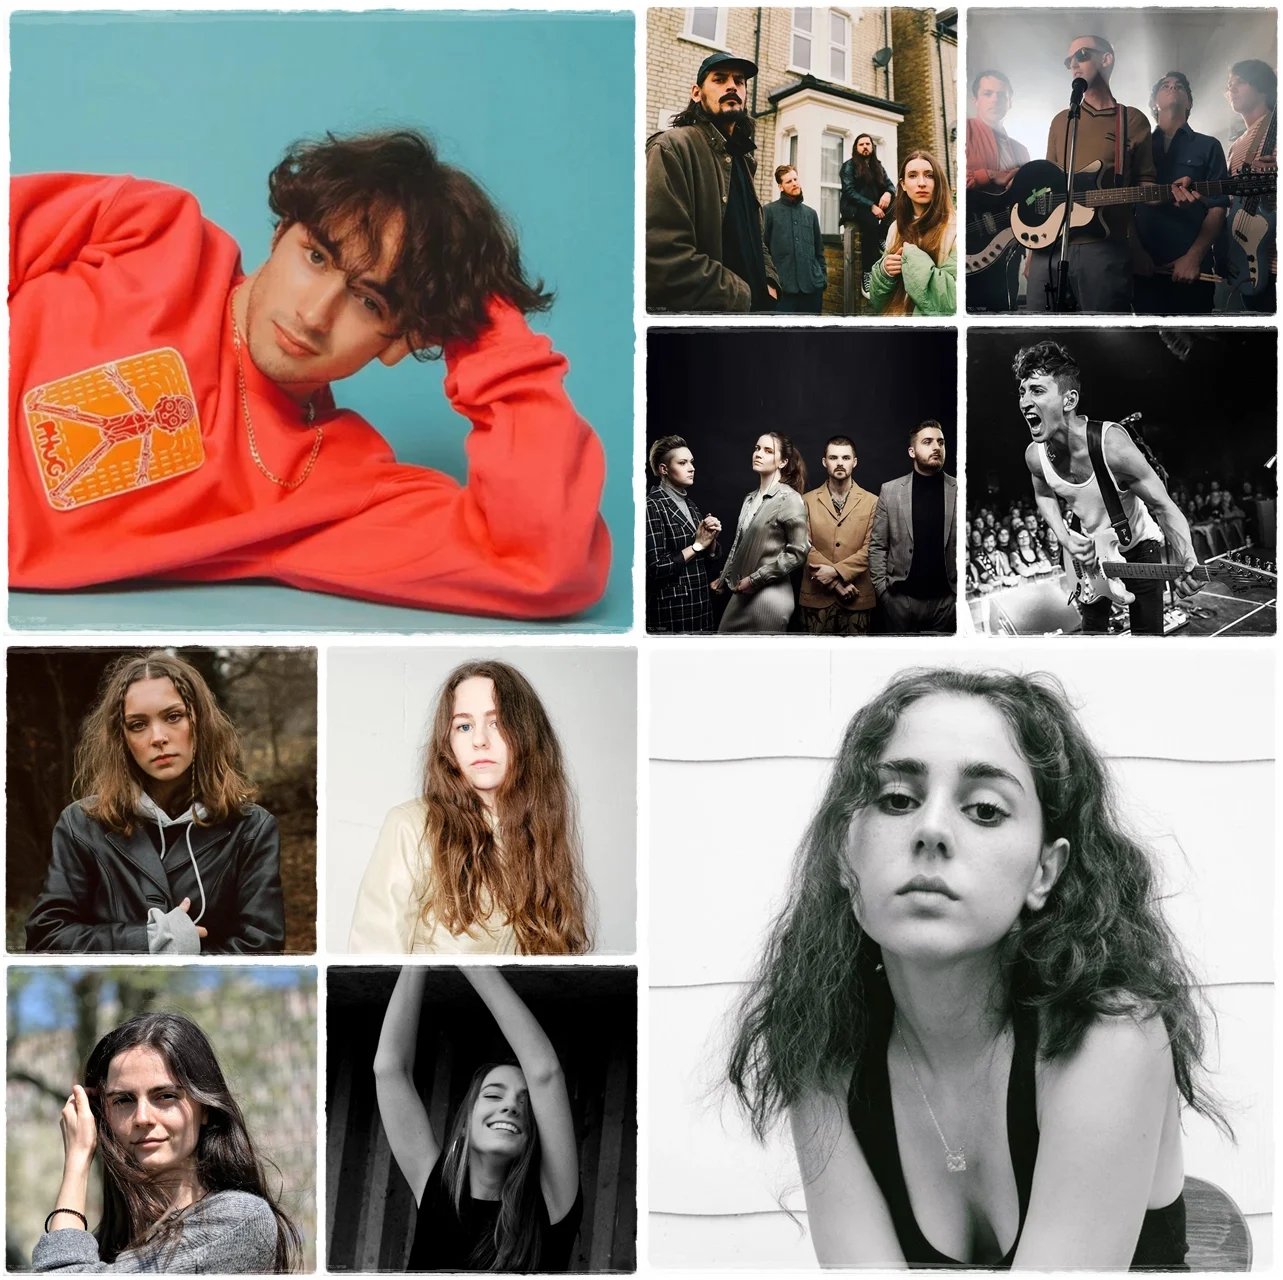 Muzyczne Odkrycia 2020: Alfie Templeman, Samia, Dry Cleaning, Kiwi Jr., Another Sky, Des Rocs, Holly Humberstone, Alice Boman, Valeria Stoica, Angie McMahon